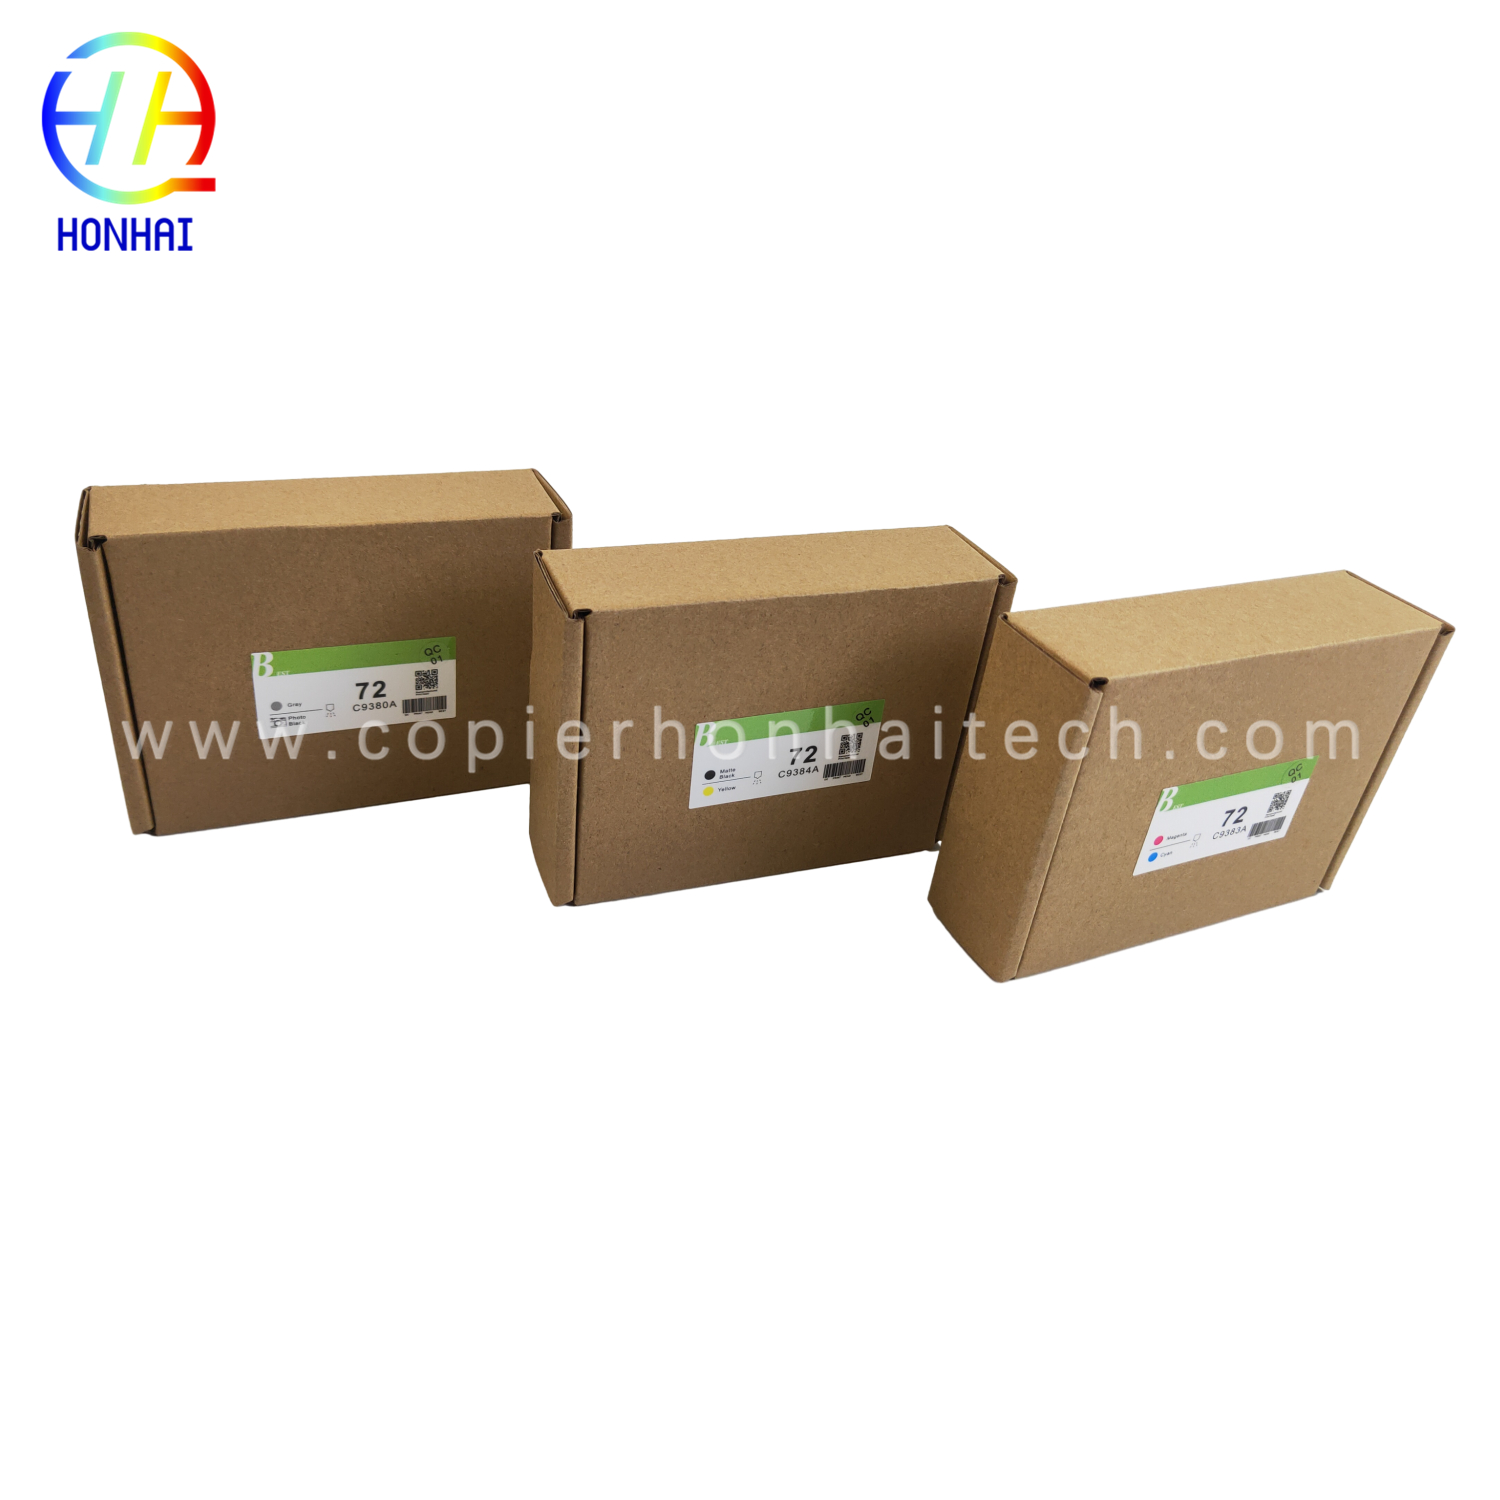 https://www.copierhonhaitech.com/printing-head-for-hp-72-c9380a-designjet-t2300-gray-and-photo-black-c9383a-magenta-and-シアン-c9384a-matte-black-and-黄色の製品/